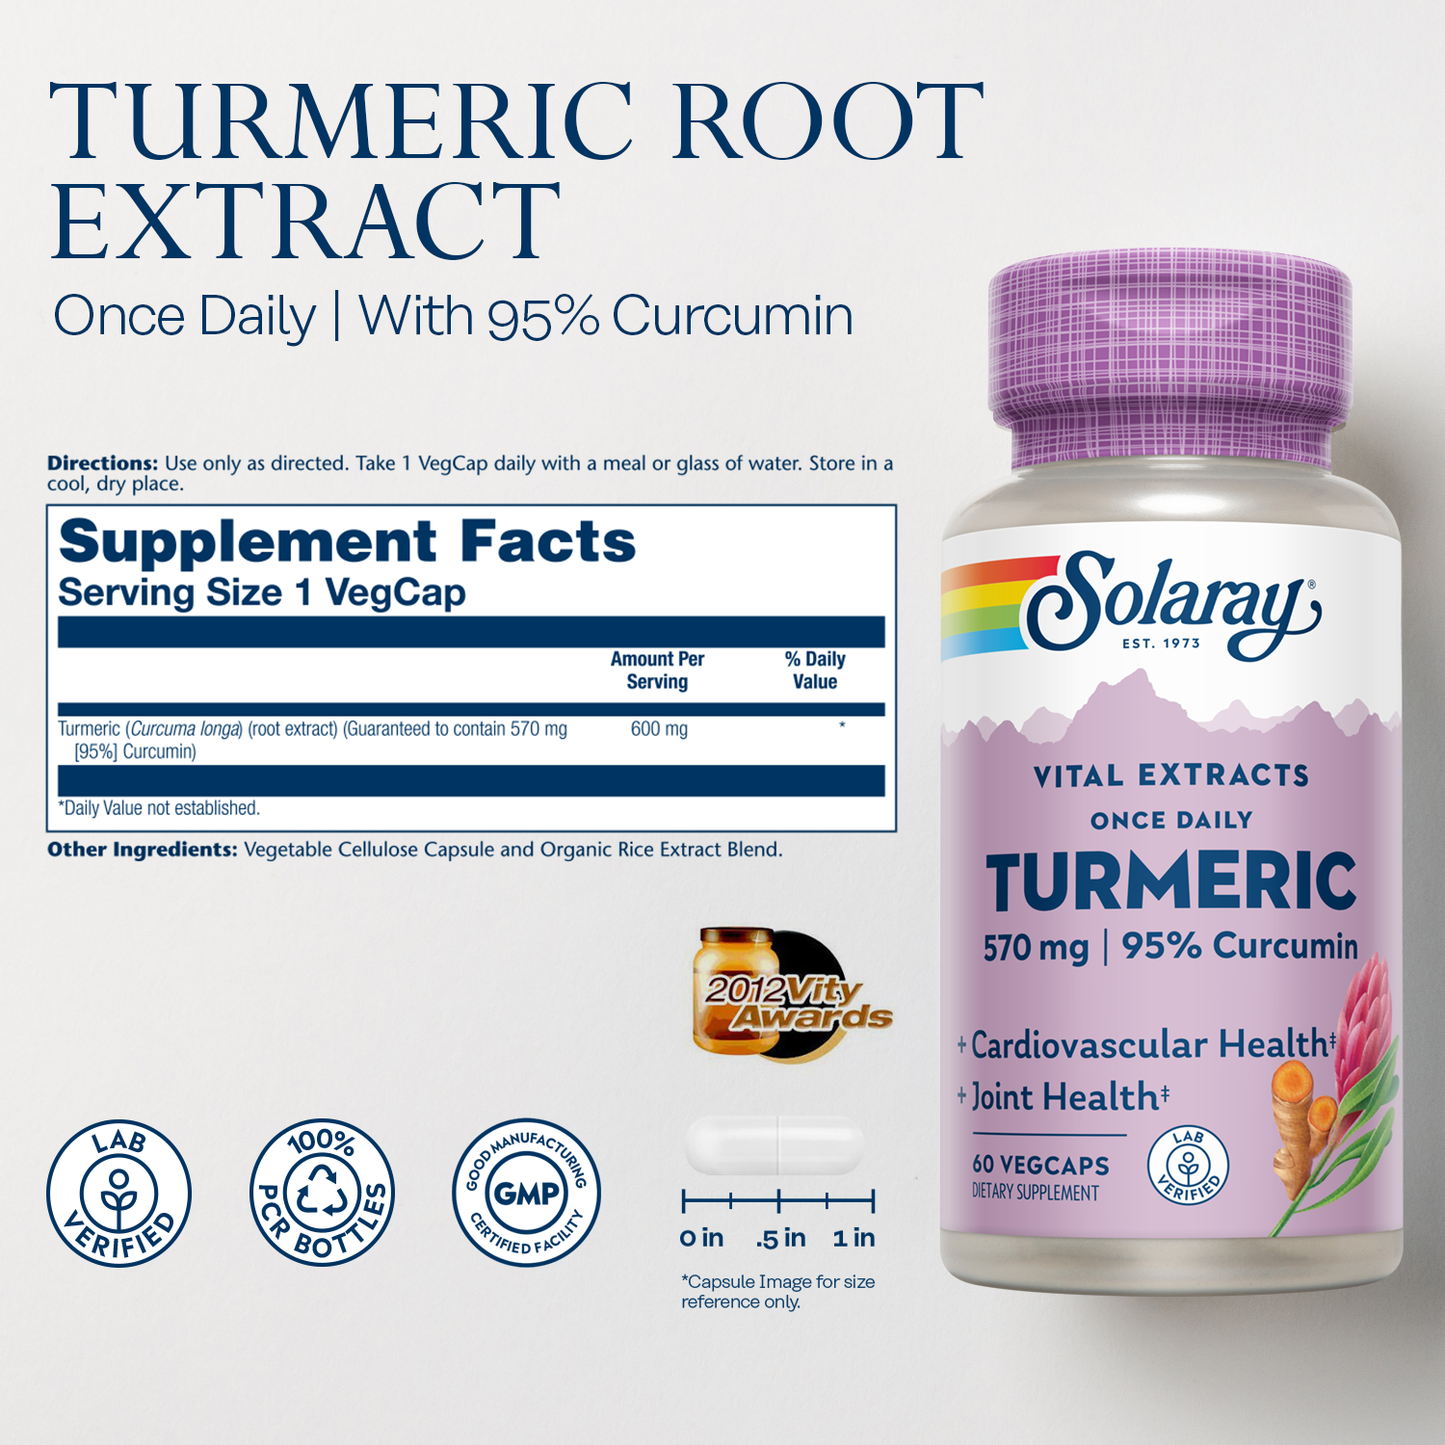 Solaray Turmeric Root Extract 600mg One Daily Healthy Joints, Cardiovascular System Support Guaranteed Potency (076280186628) (60 CT)